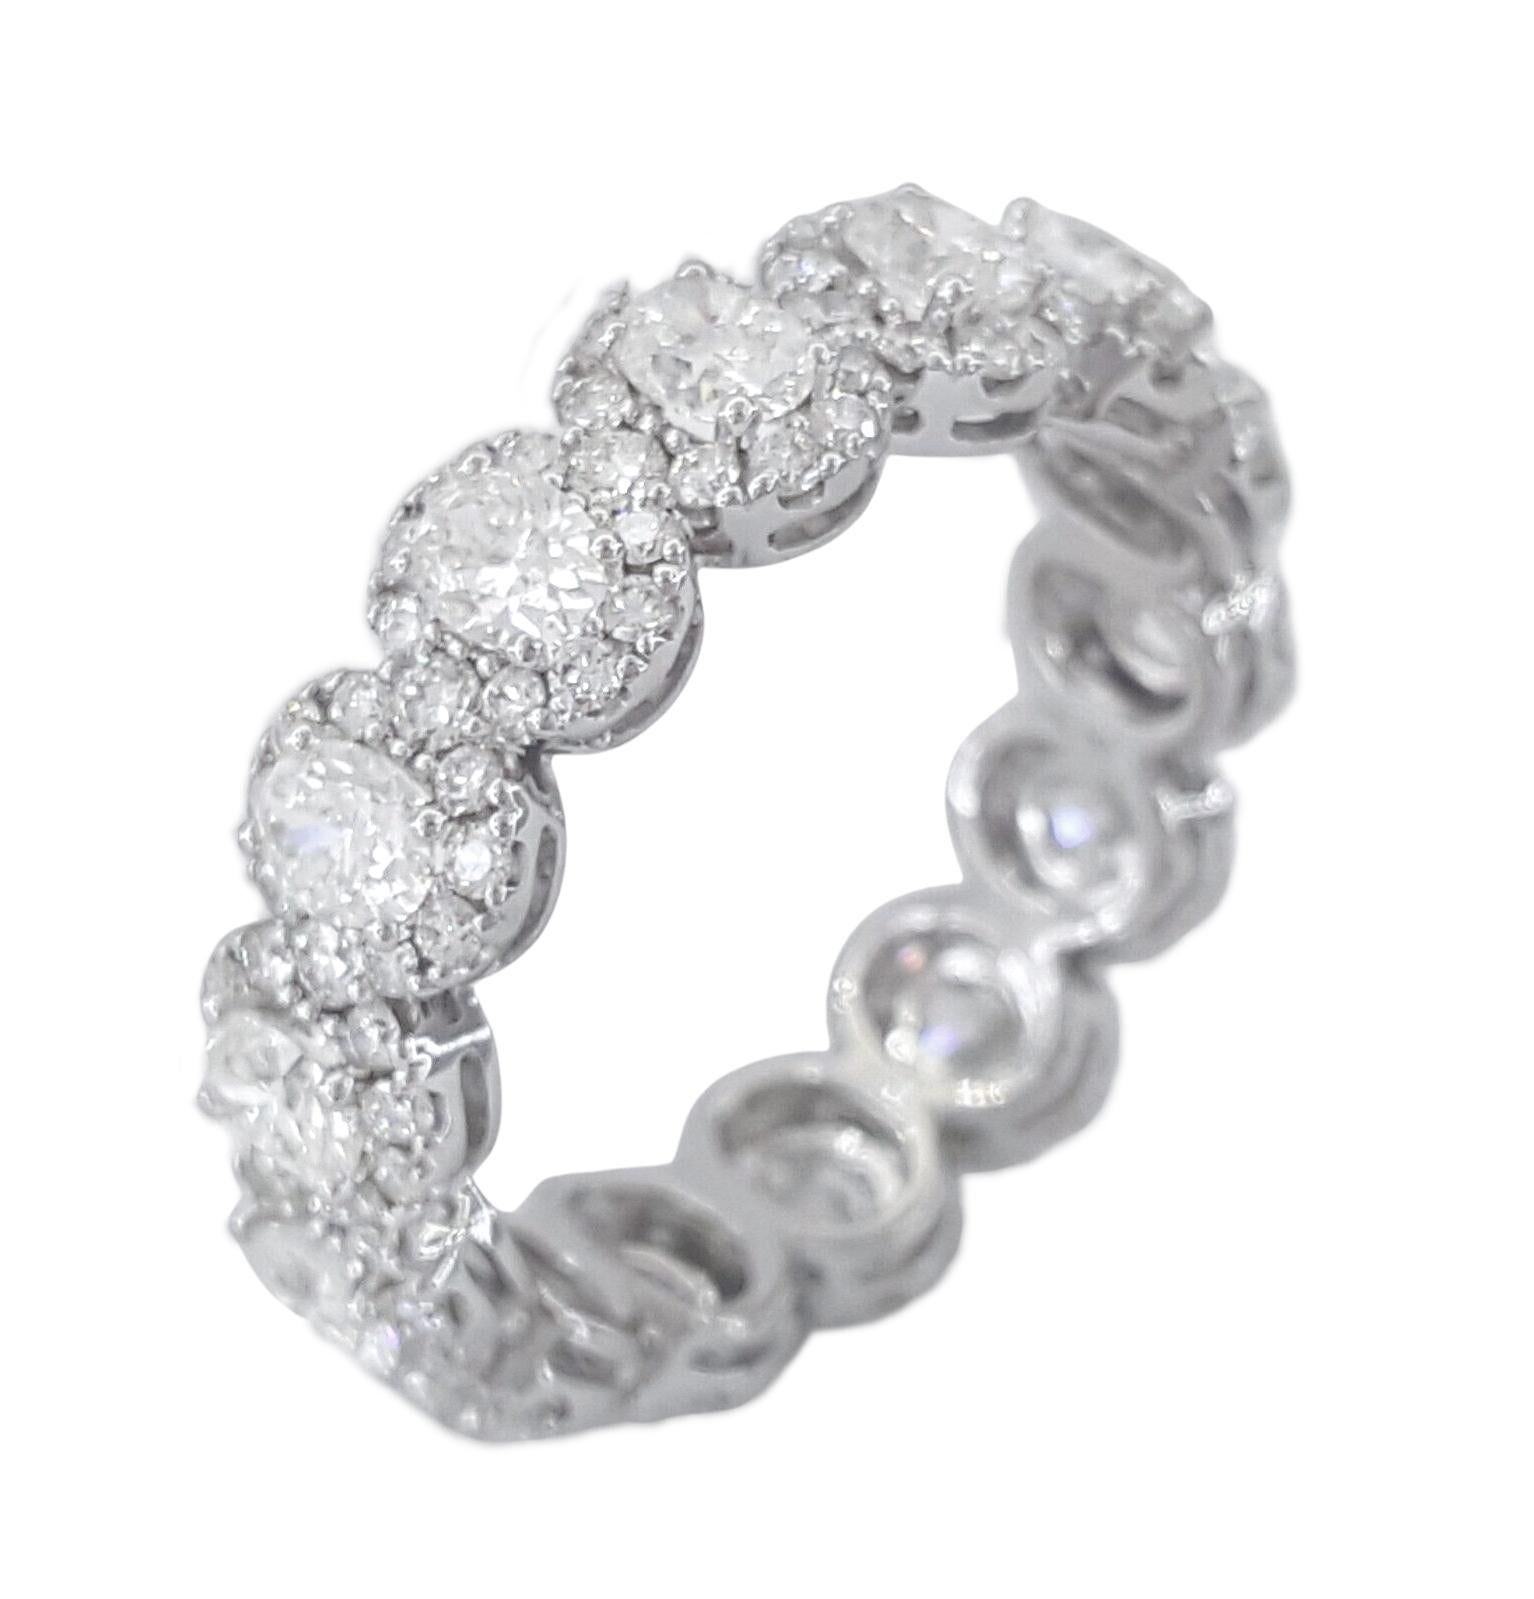 Modern 3 Carat Oval Halo Eternity Band Ring For Sale